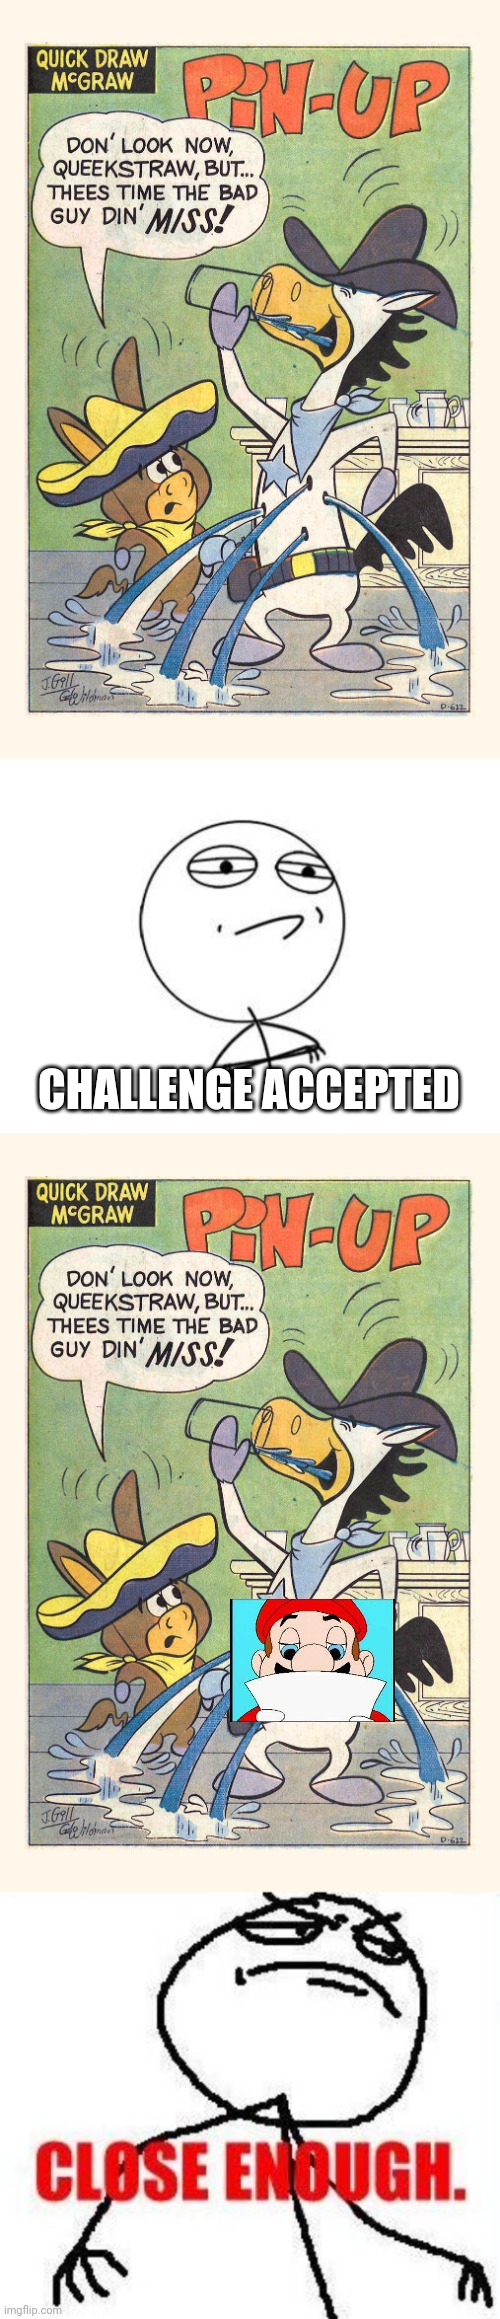 It ain't much but it honest work | CHALLENGE ACCEPTED | image tagged in memes,challenge accepted rage face,close enough,quickdraw mcgraw,pin up,pinup | made w/ Imgflip meme maker